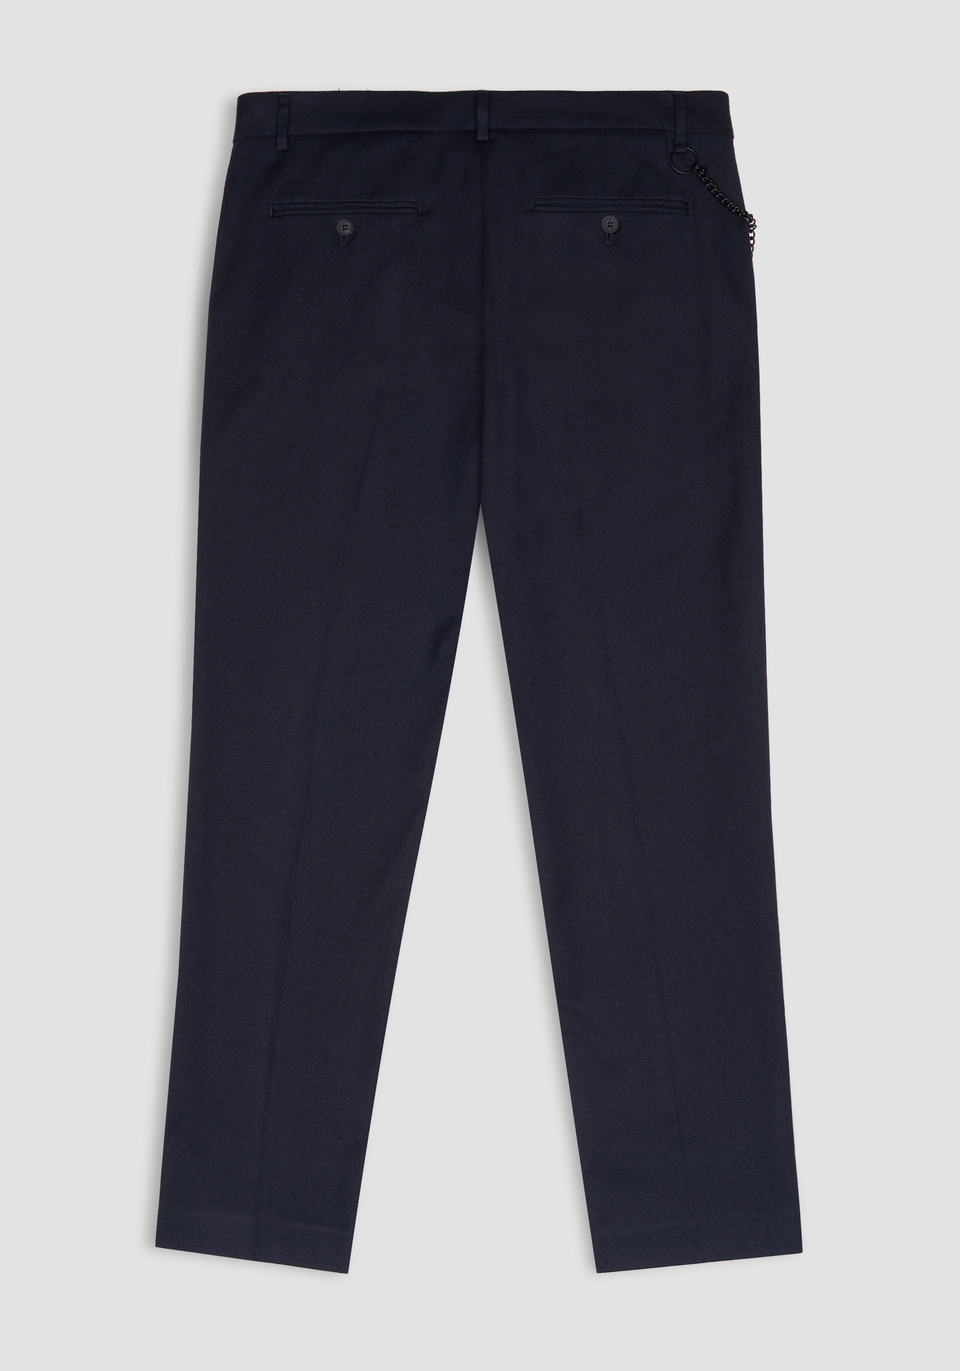 "JAGGER" CARROT FIT TROUSERS - Antony Morato Online Shop